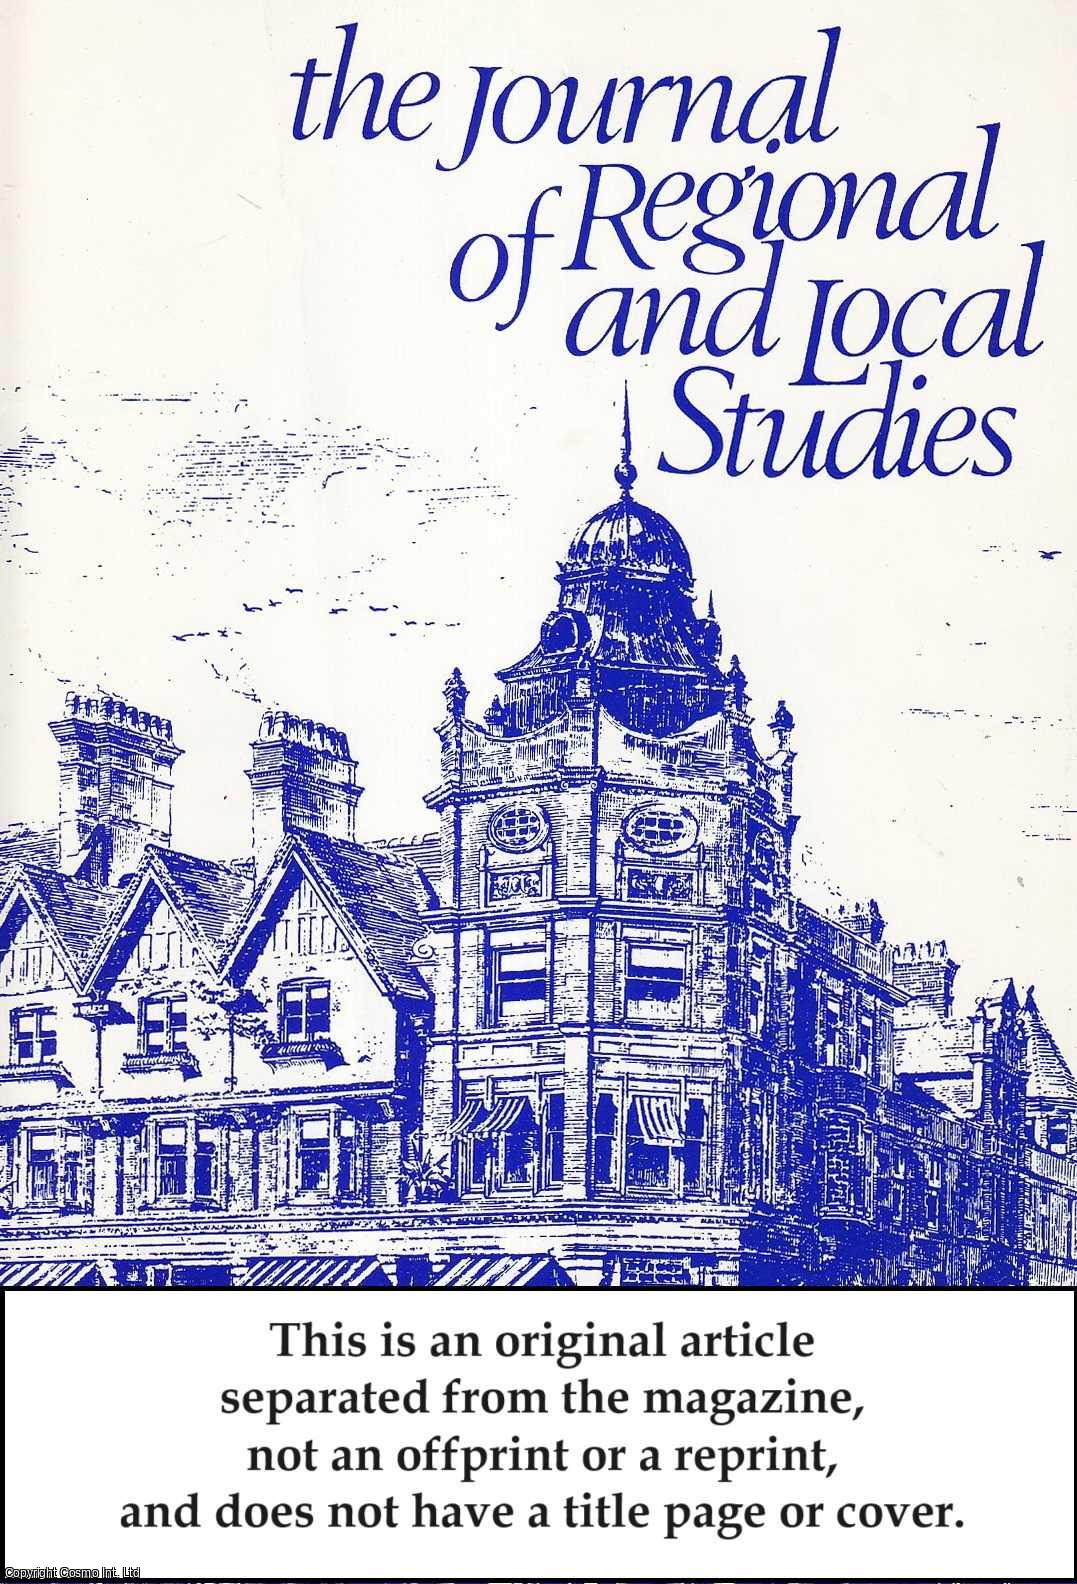 Phil Liddle - The Rise, Fall and Rise of The North Bedfordshire Village 1801-1990. An original article from Journal of Regional & Local Studies, 1991.